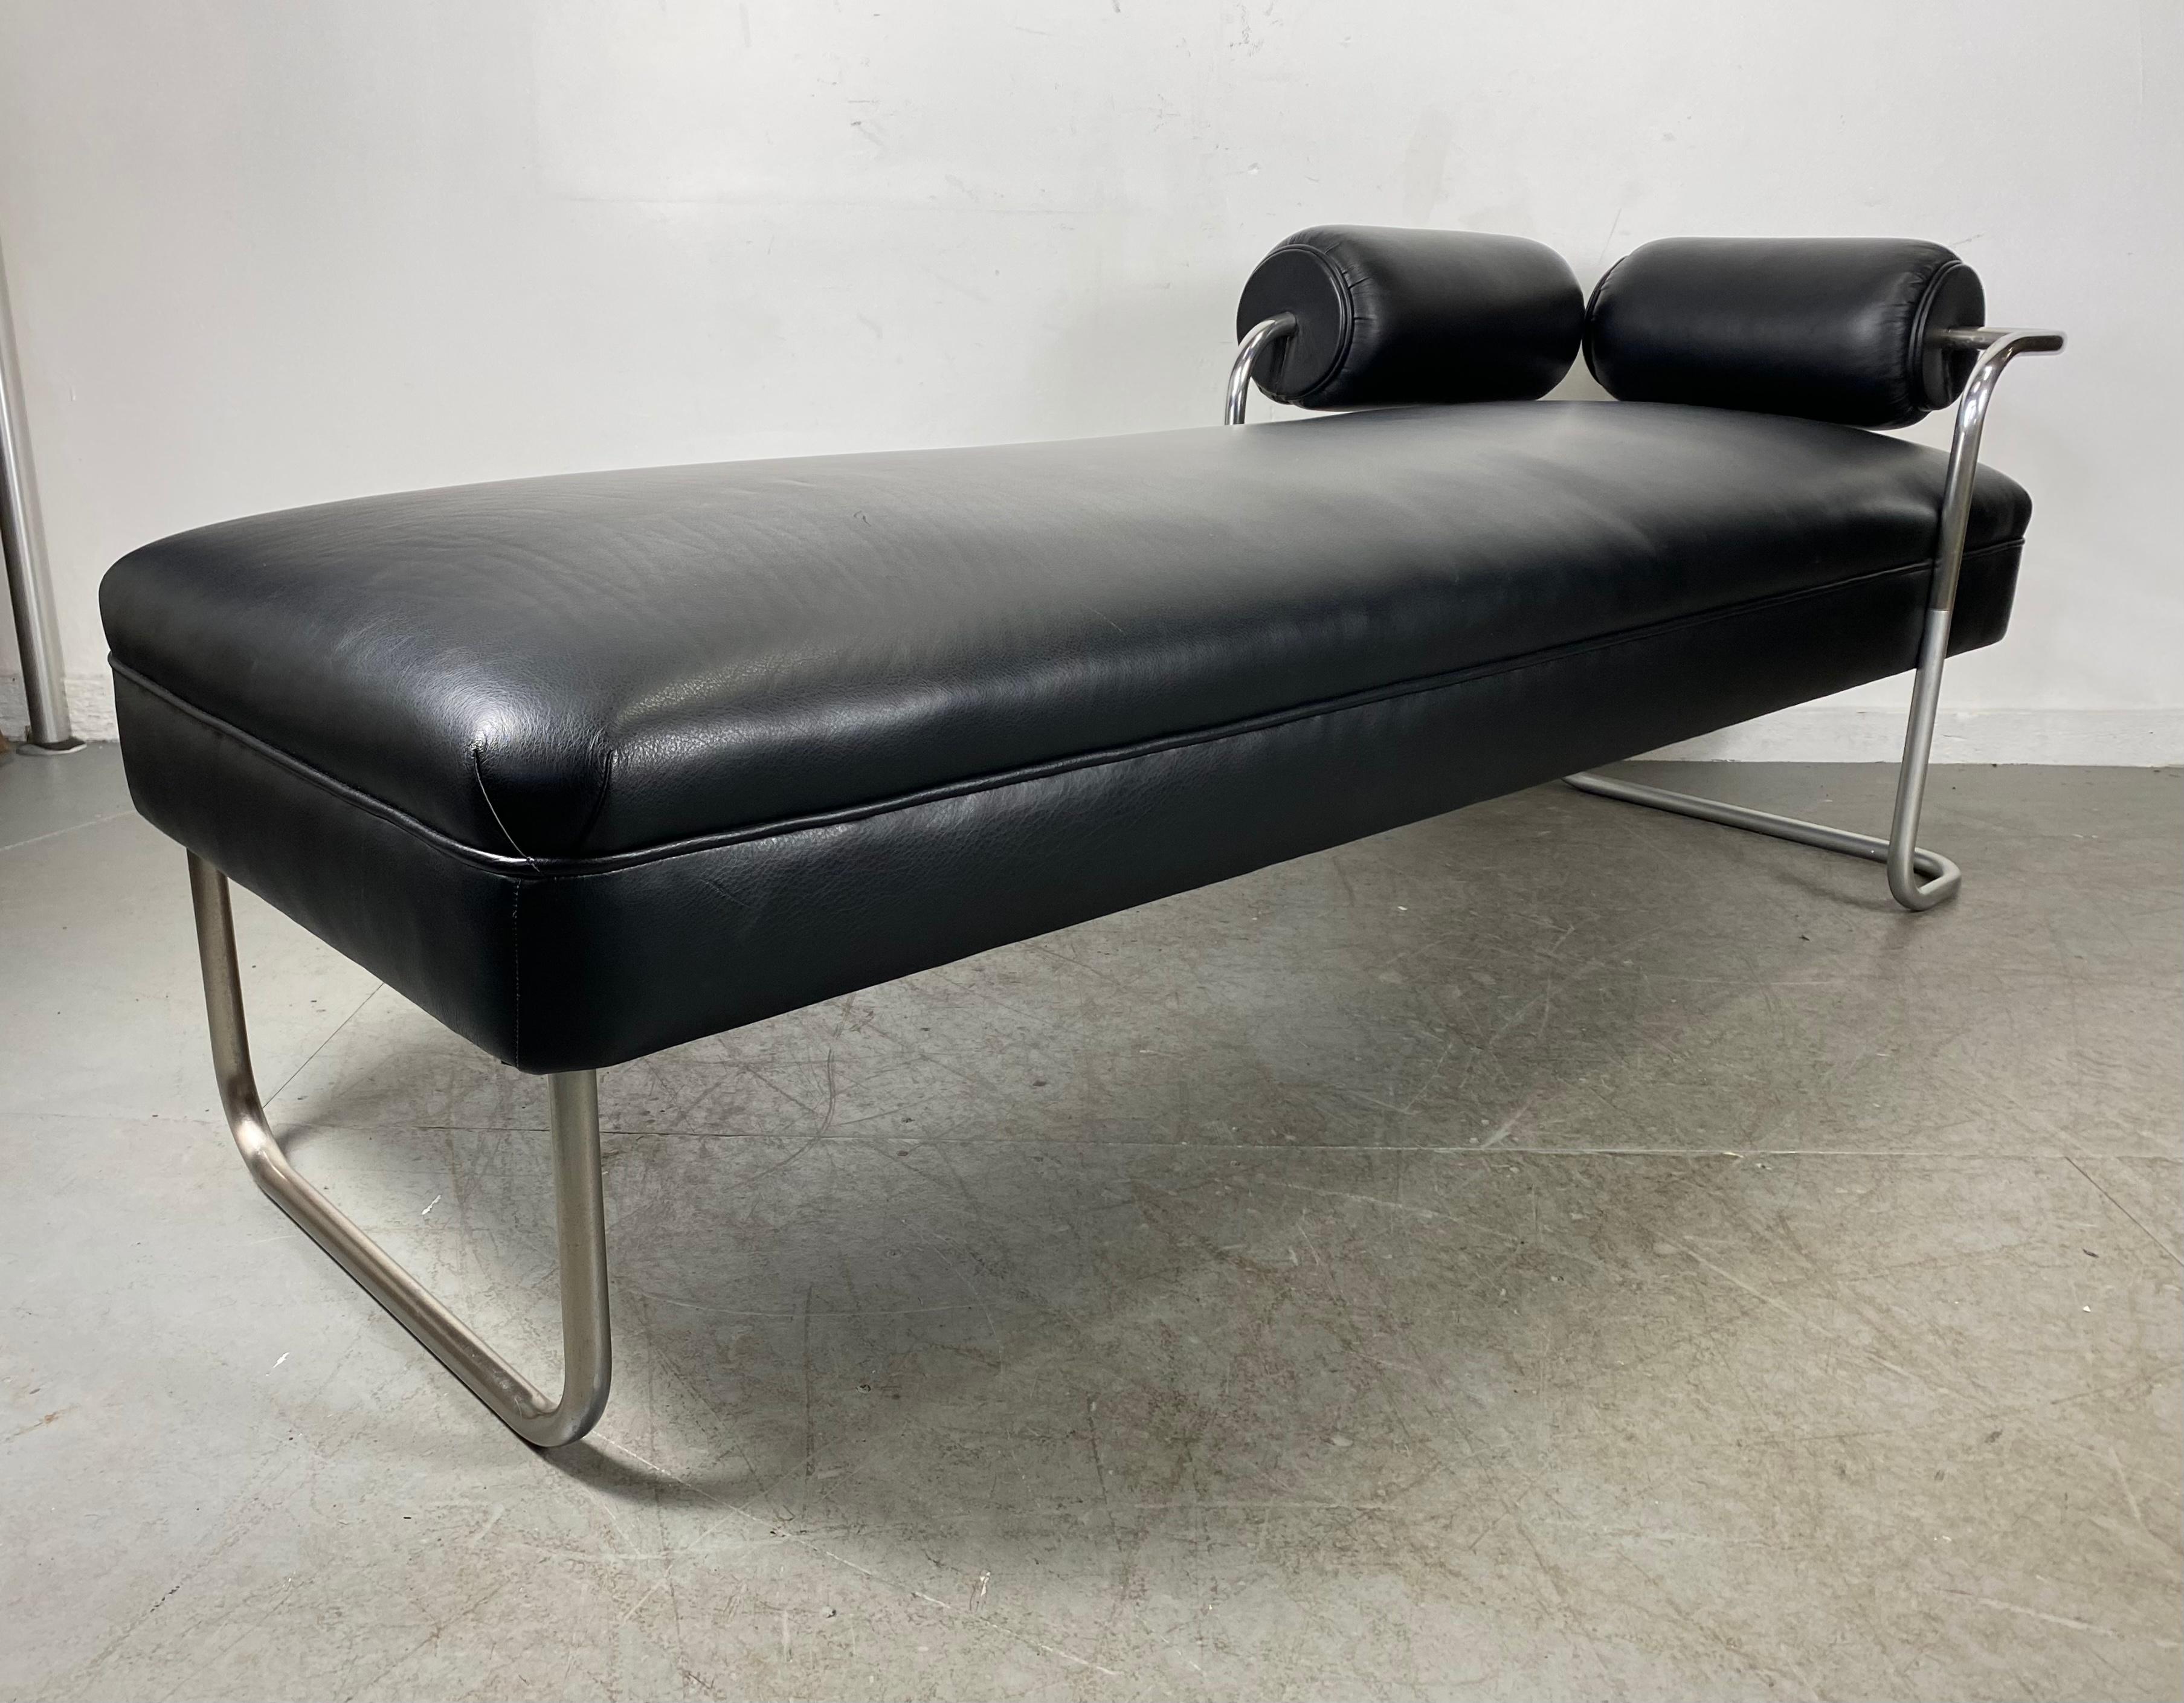 Unusual Tubular Chrome and Leather Bauhaus Chaise Lounge / Daybed 3